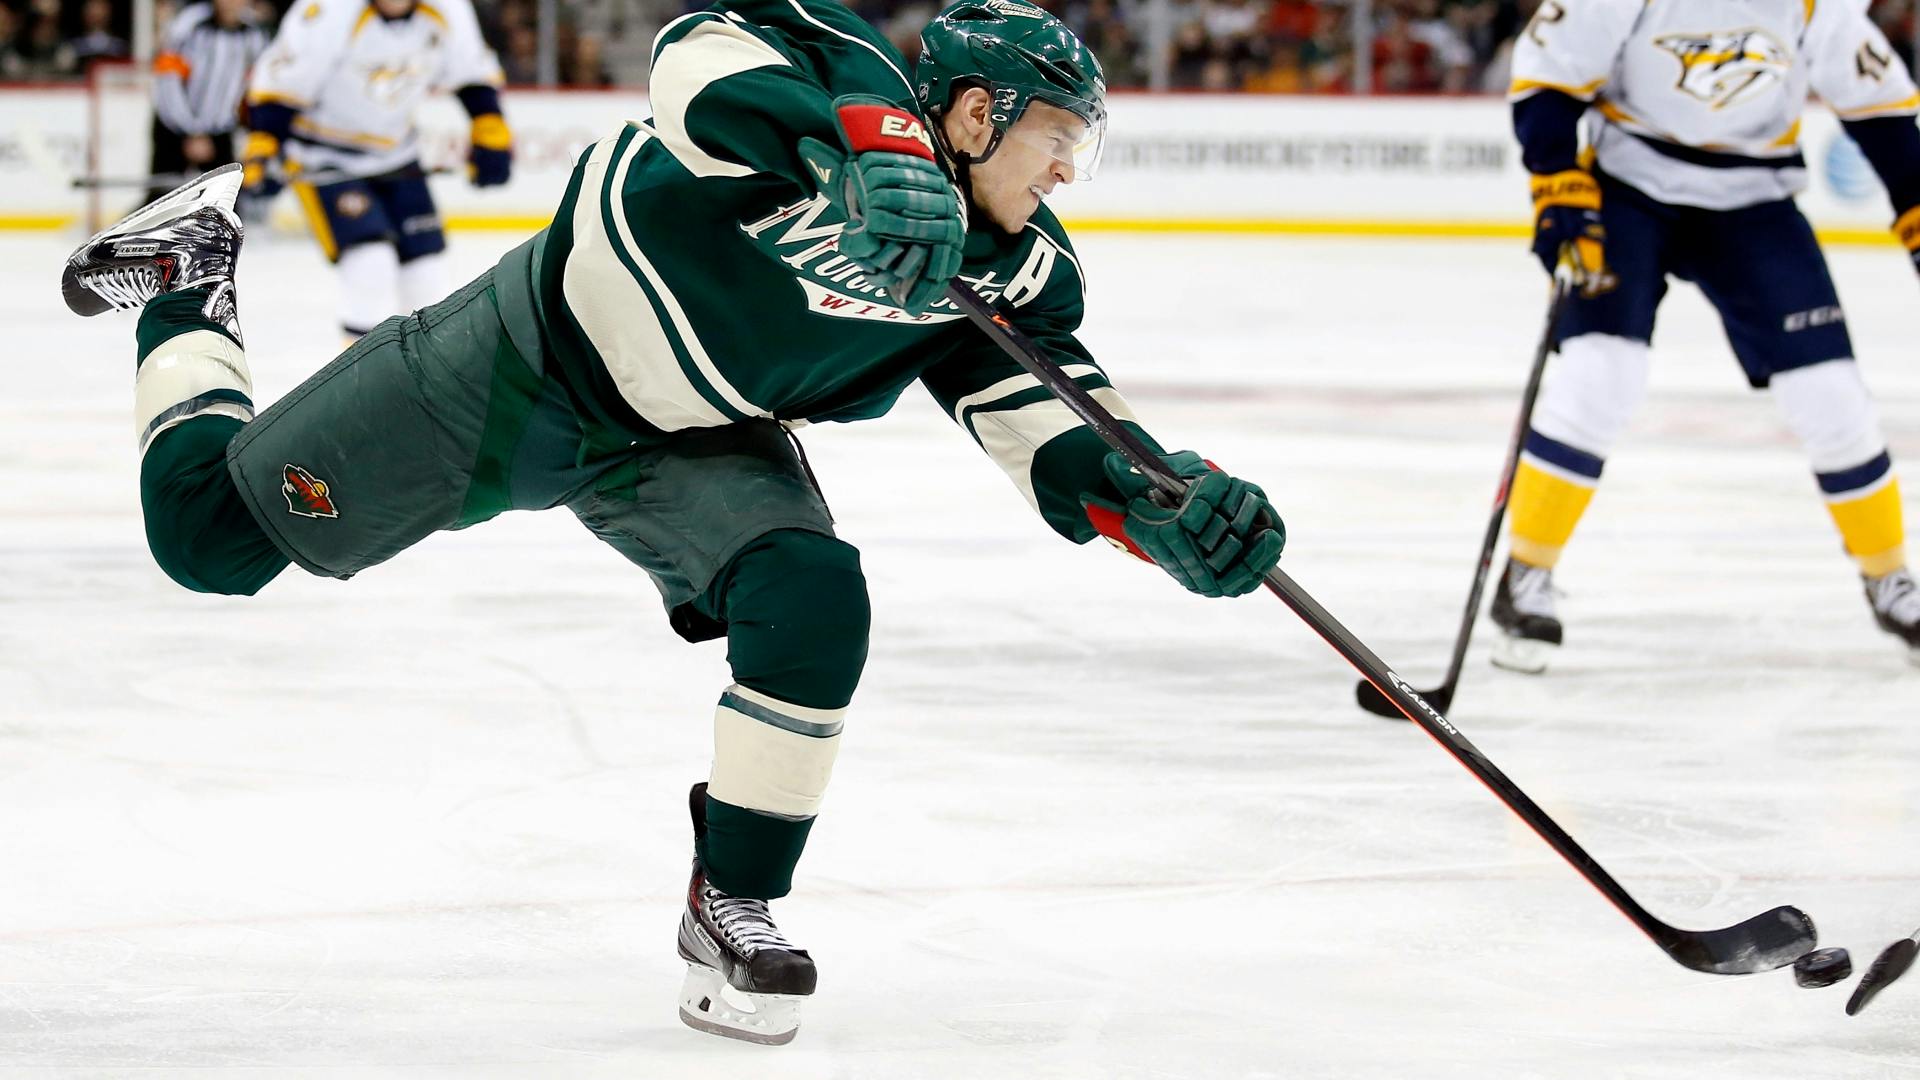 The Wild will face the Colorado Avs in round one of the Stanley Cup playoffs and they're armed with confidence.